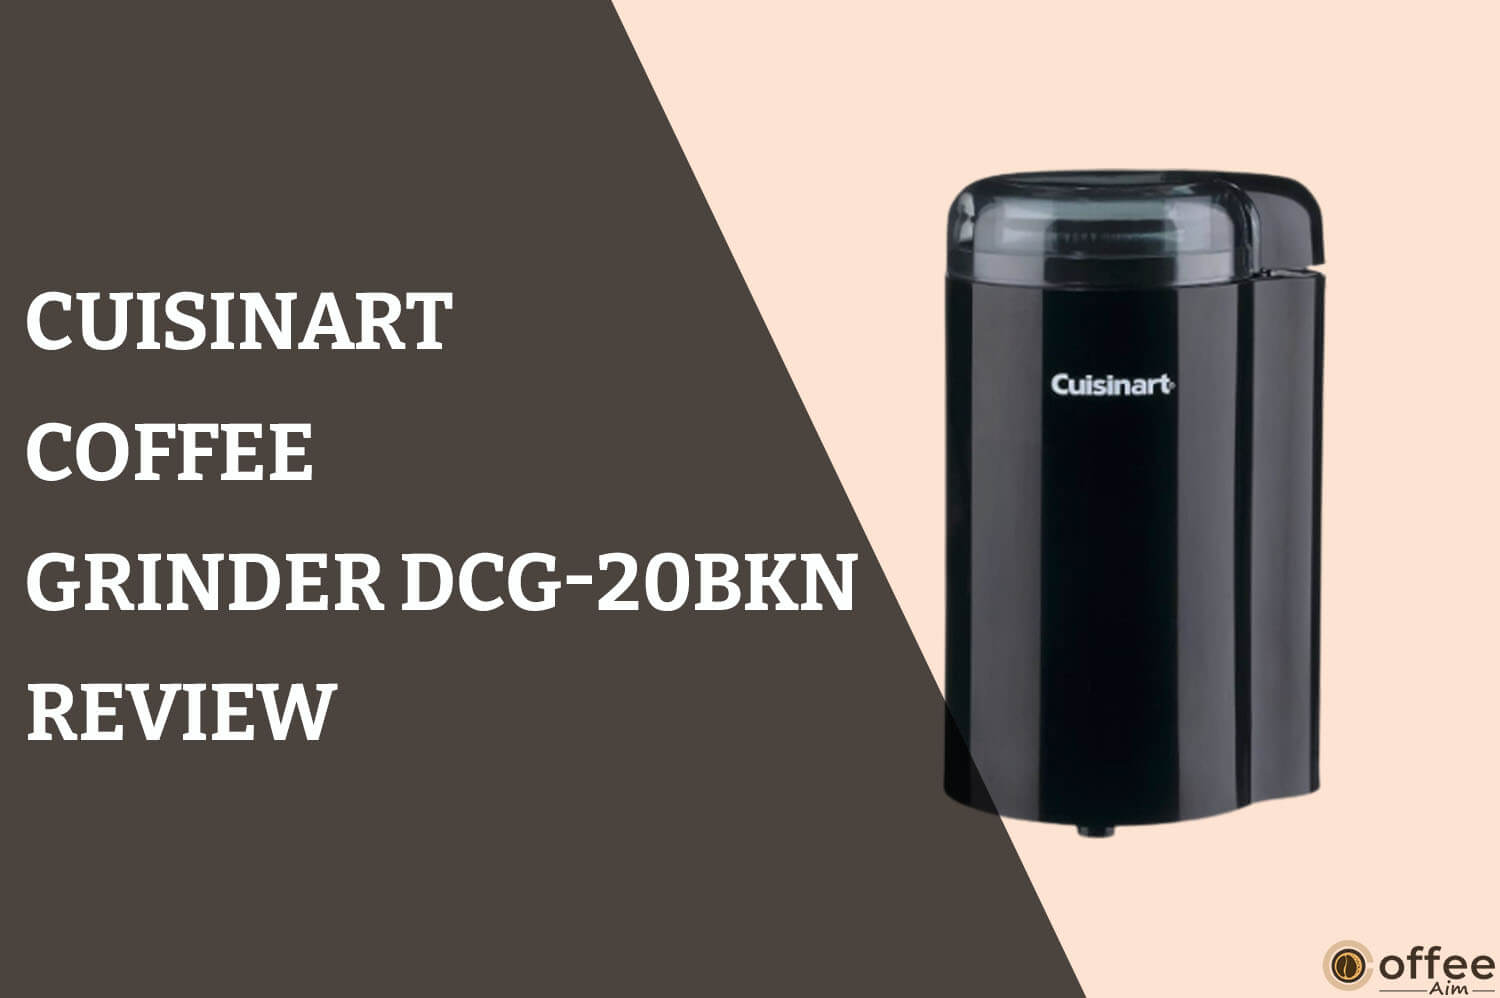 Feature image for the article "Cuisinart Coffee Grinder DCG-20BKN Review"